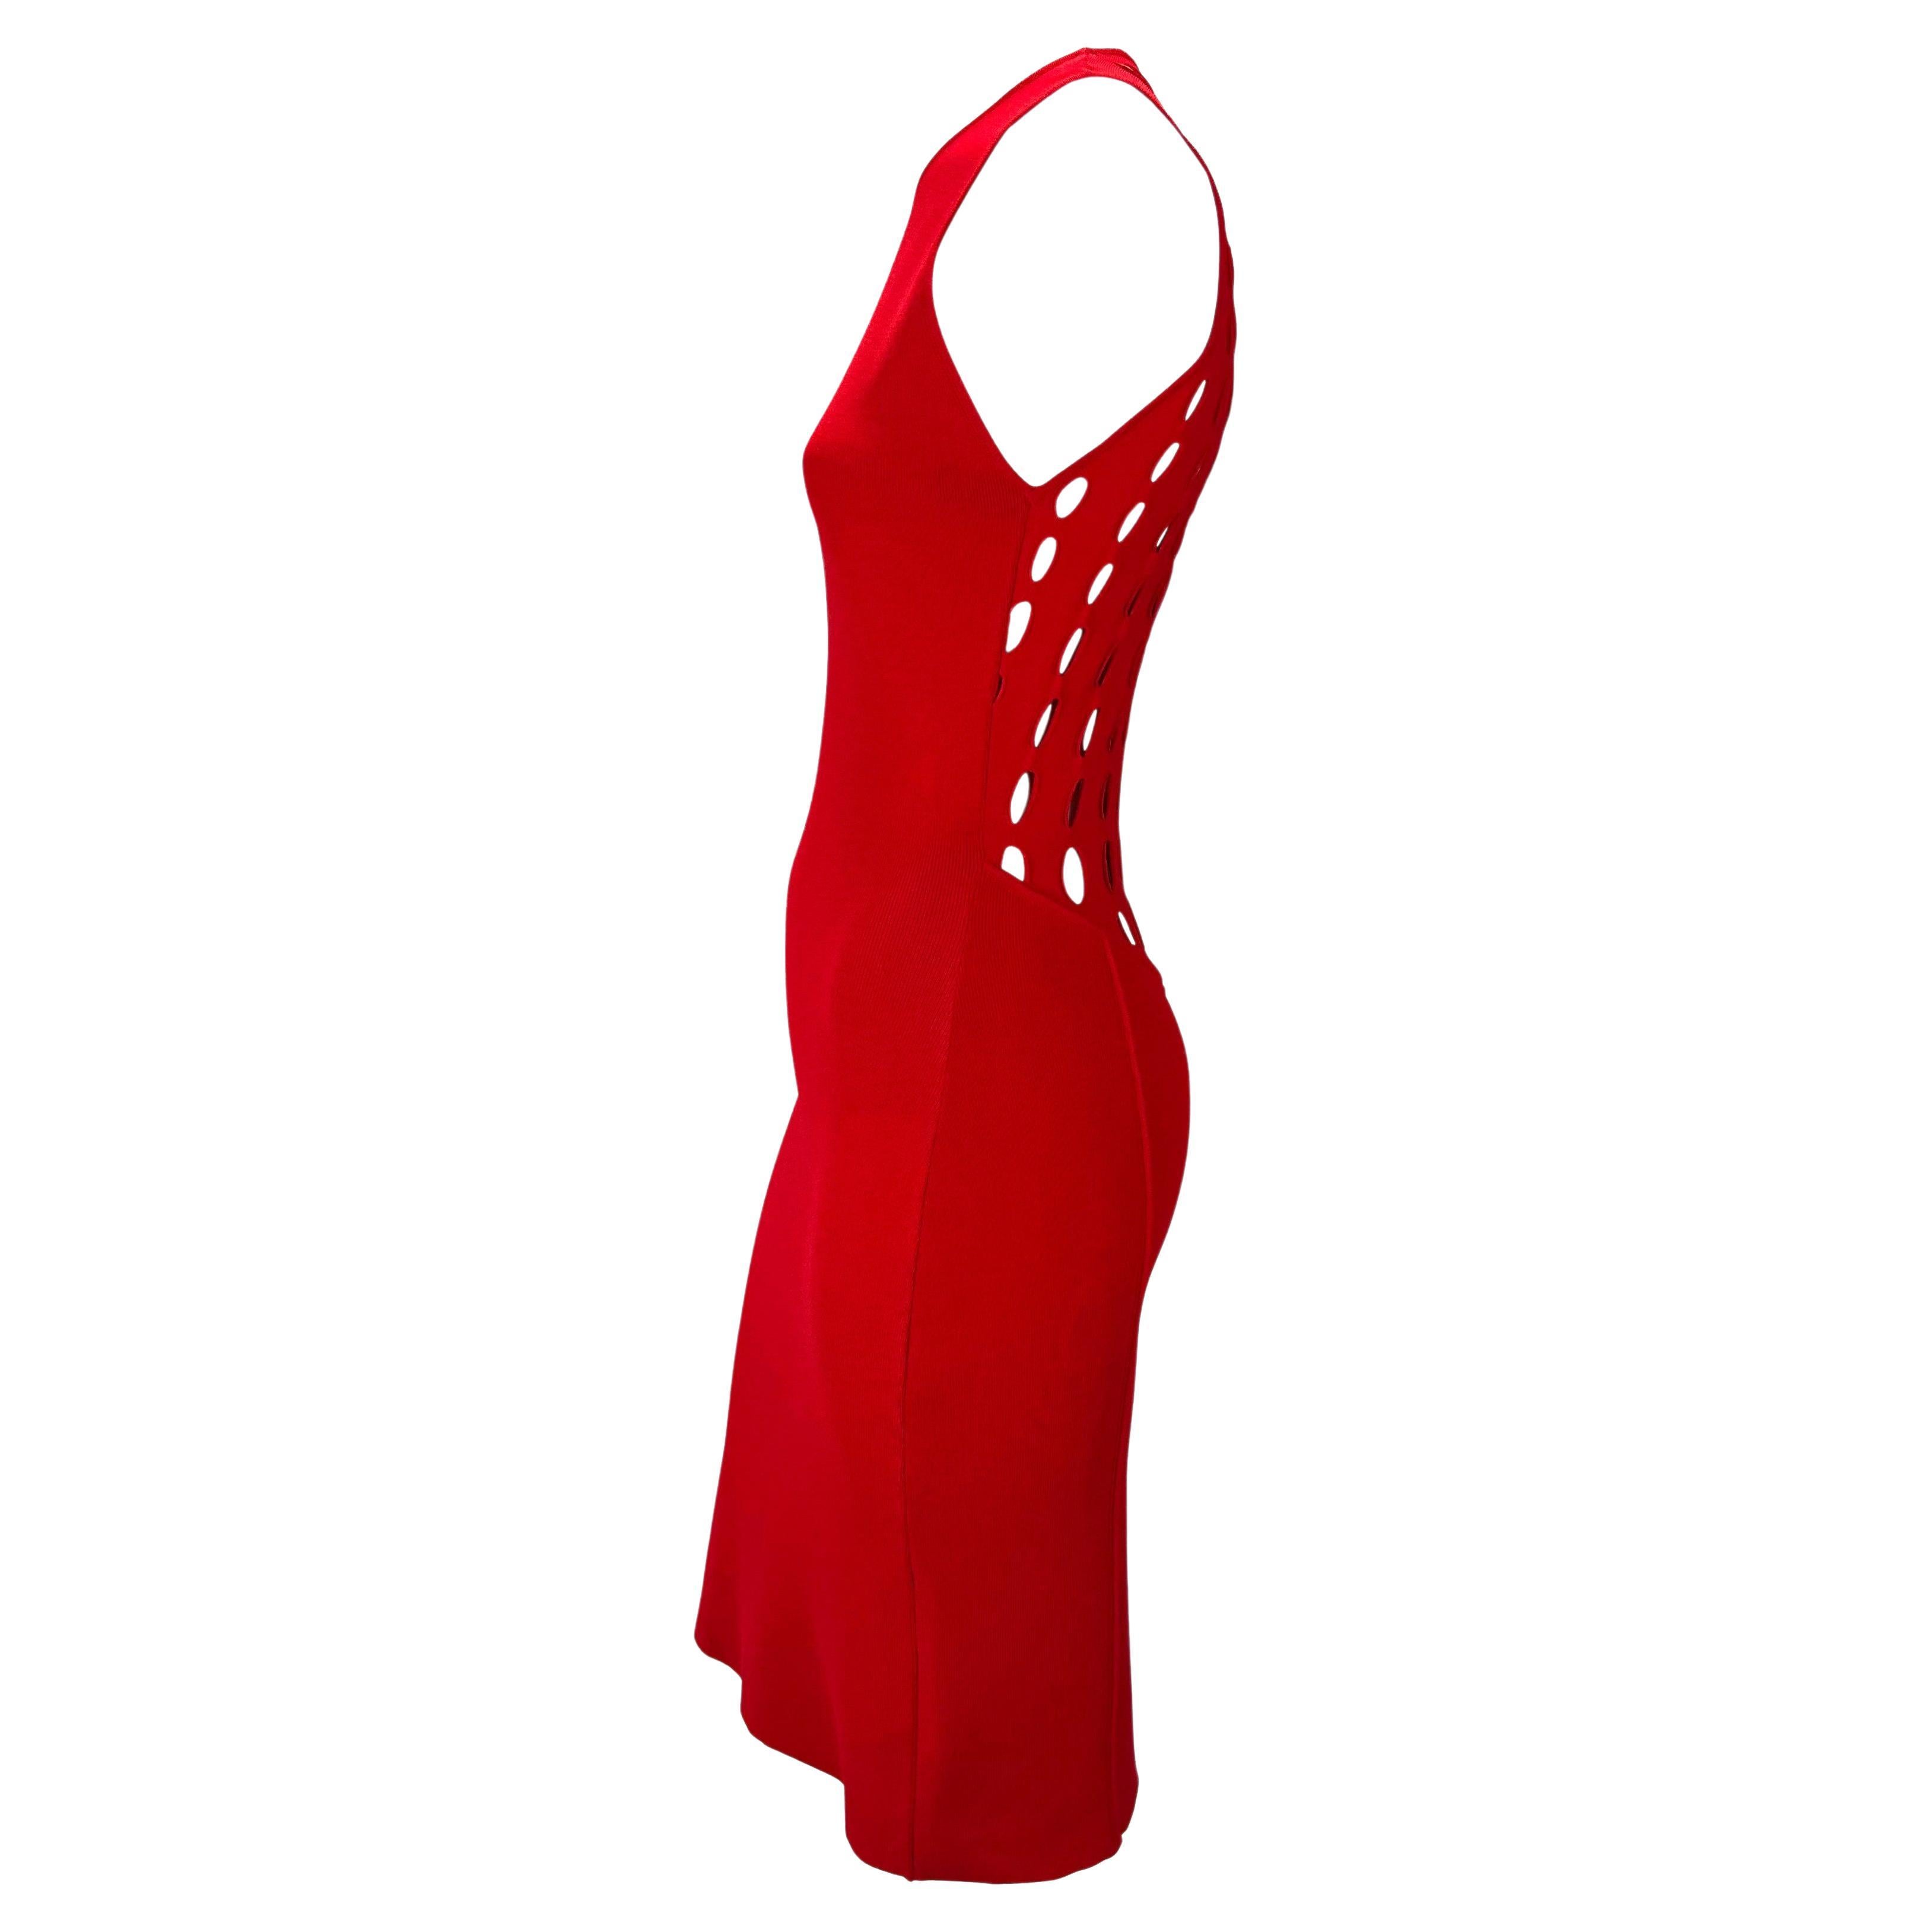 S/S 2002 Gianni Versace by Donatella Red Eyelet Cutout Stretch Racerback Dress For Sale 2